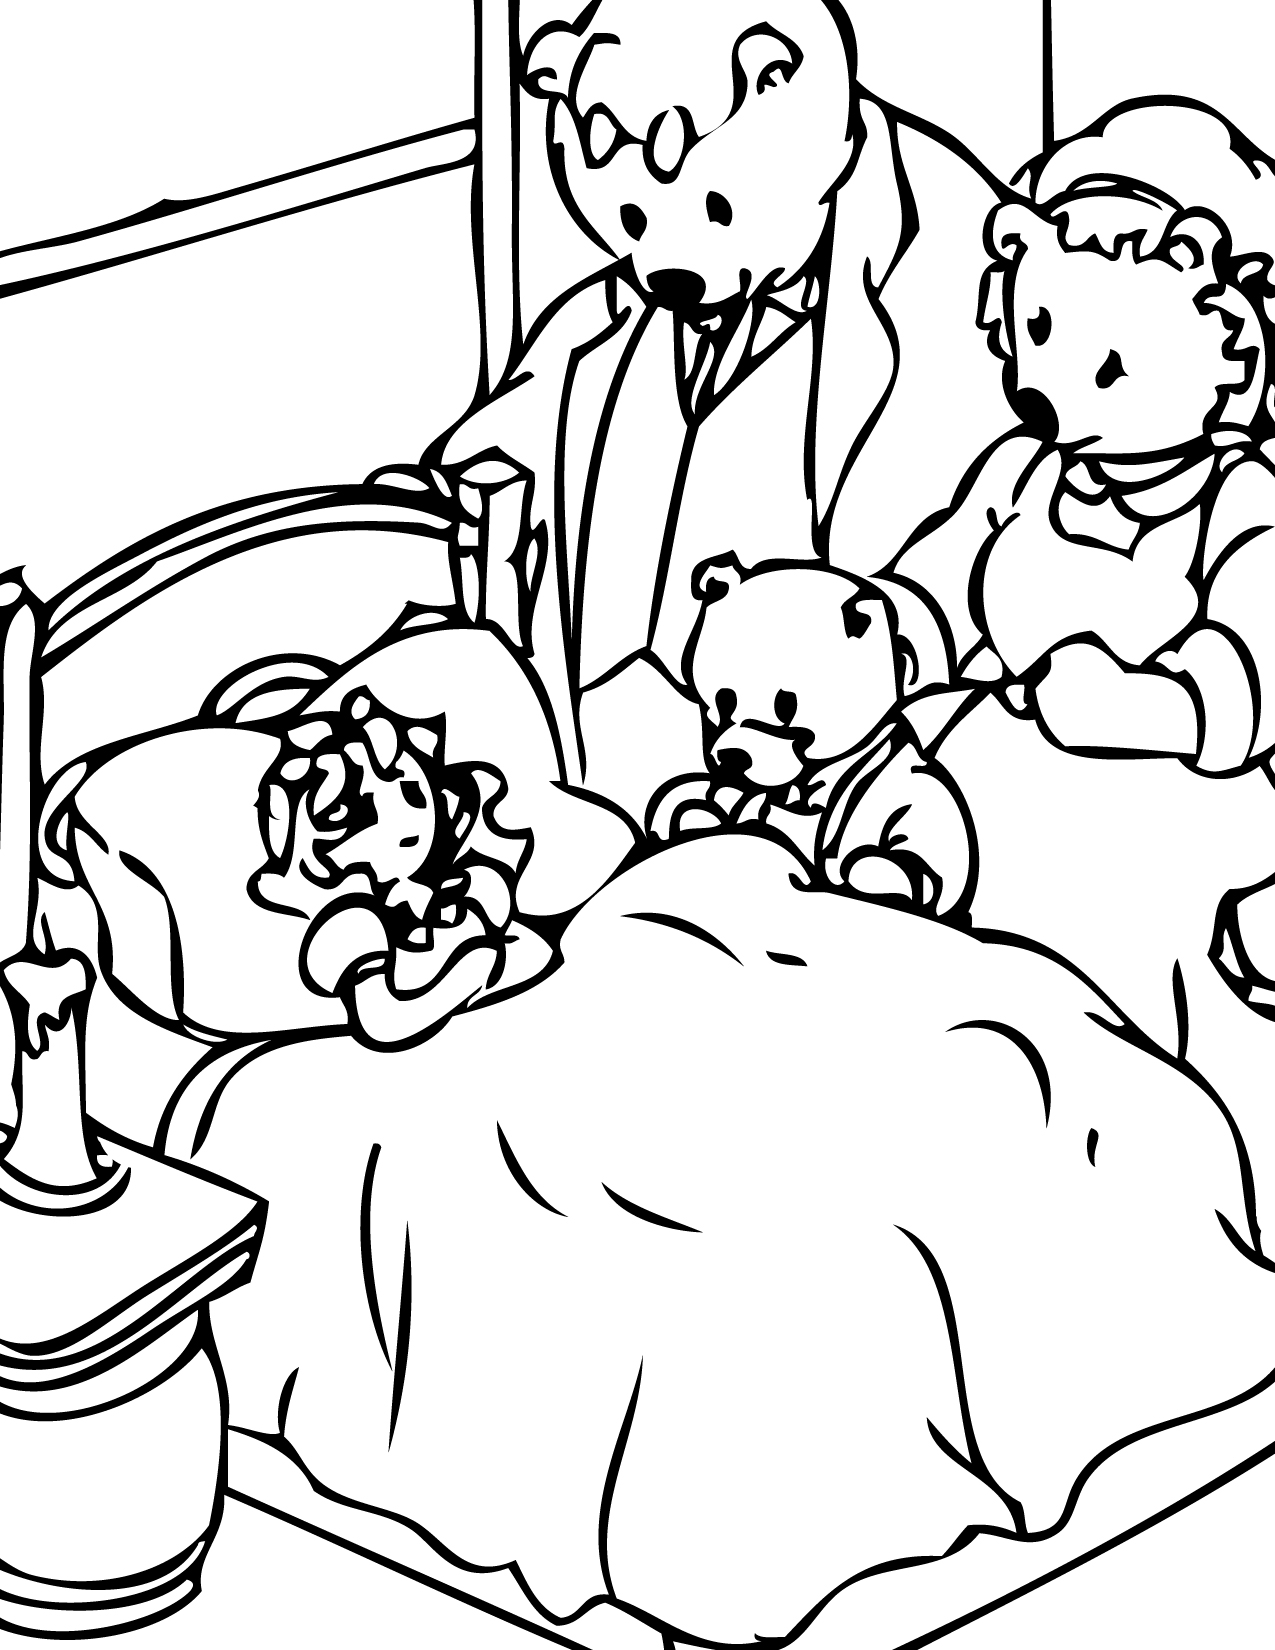 goldilocks-and-the-three-bears-coloring-page-handipoints-coloring-home